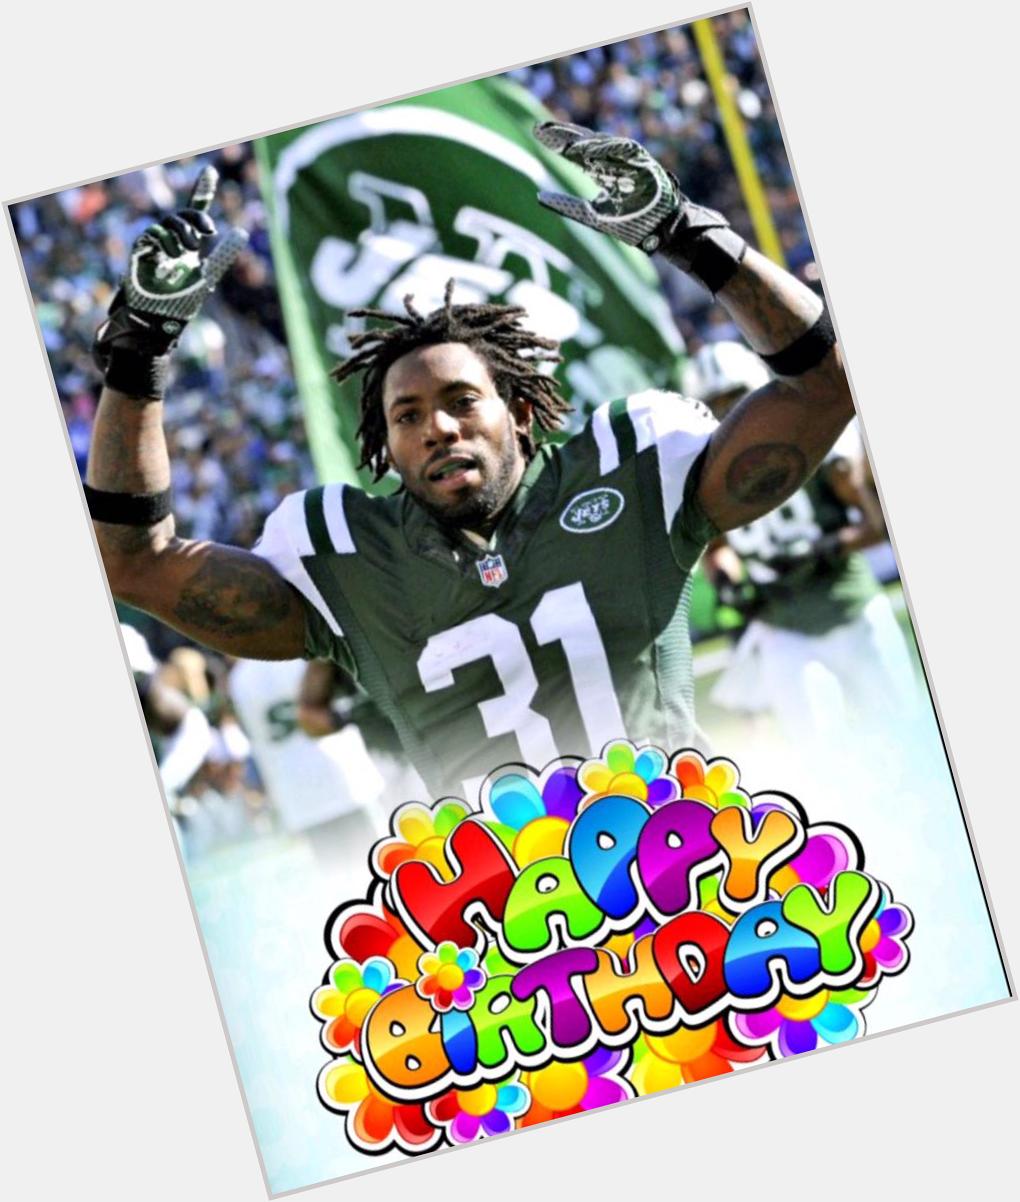 Happy Birthday to Antonio Cromartie! Over his 9-year career he has been to 4 Pro Bowls and been on 3 different teams! 